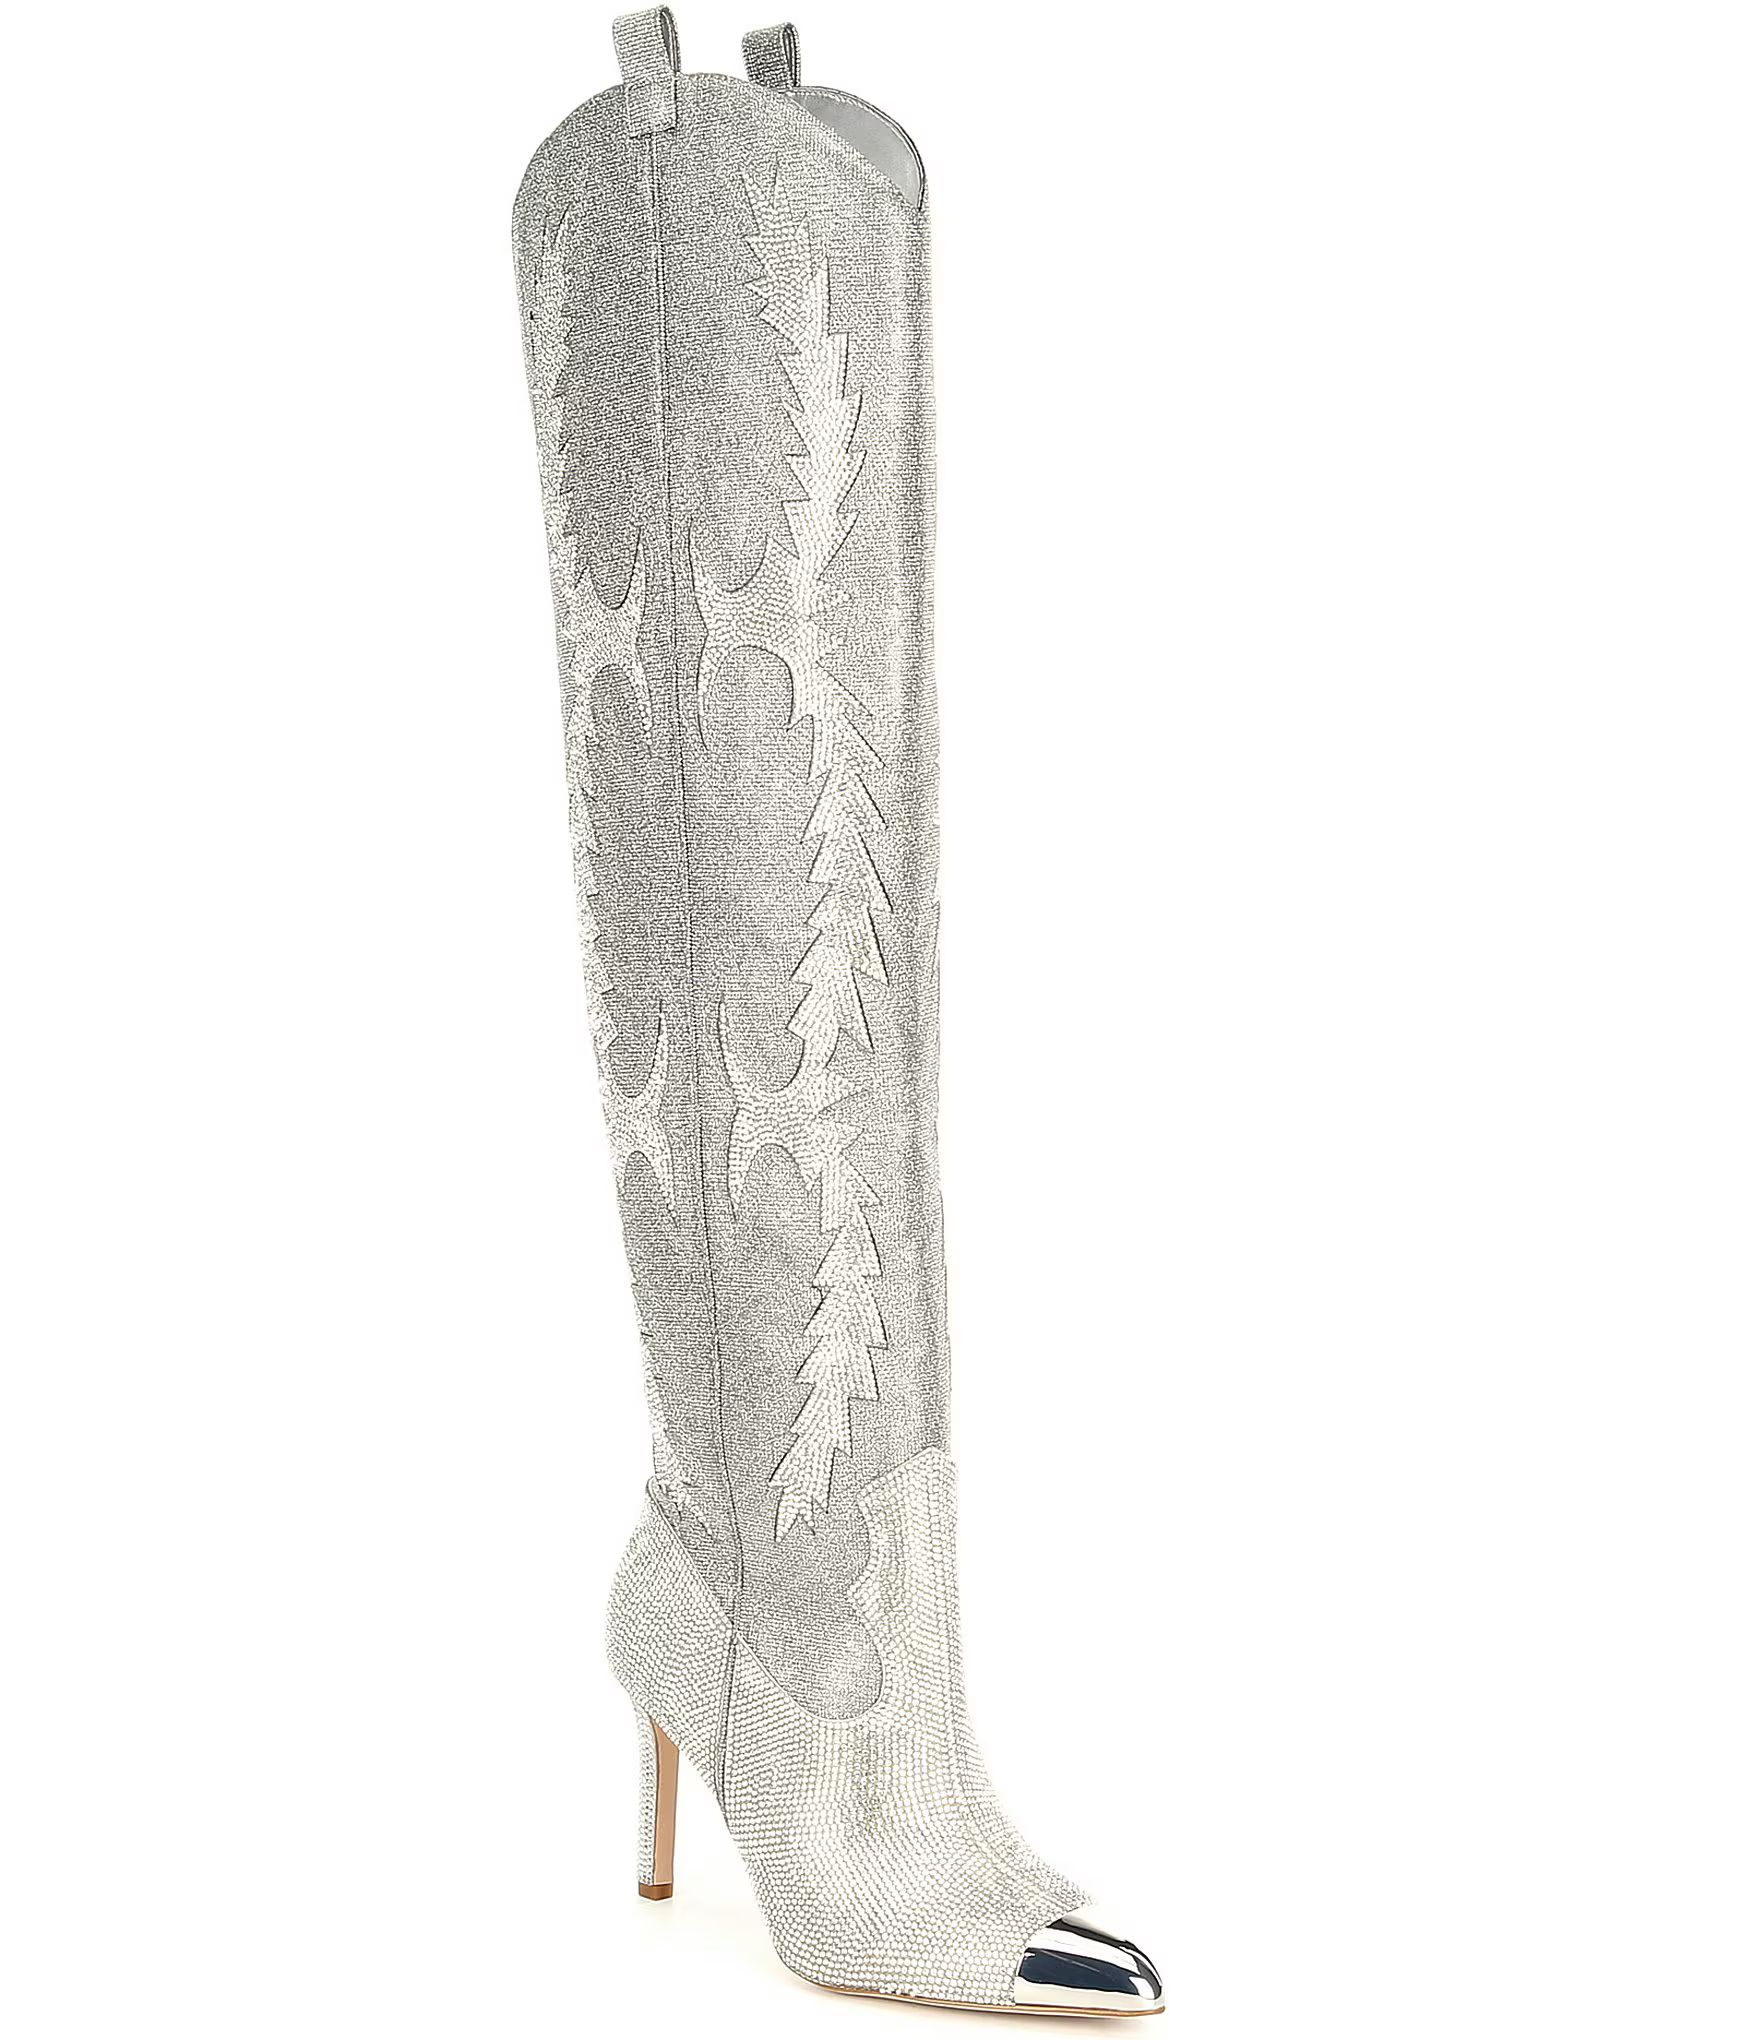 20th Anniversary Collection KatyannaTwo Rhinestone Embellished Over-the-Knee Western Dress Boots | Dillards